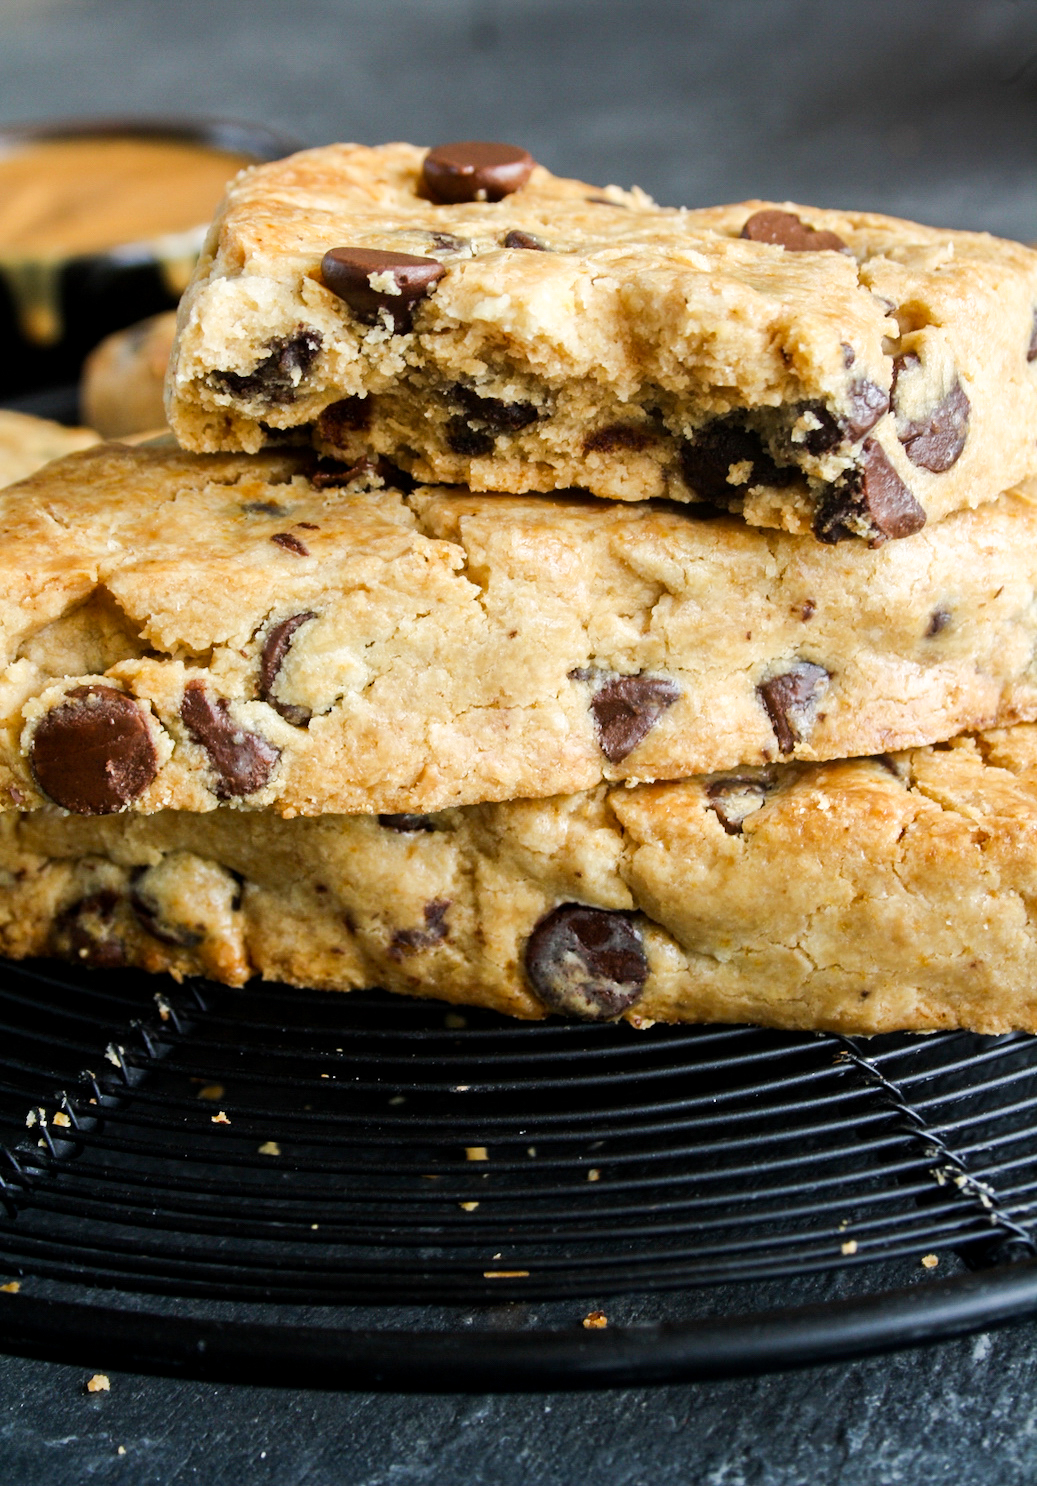 Tender crumbly peanut butter scones with melty chocolate chips